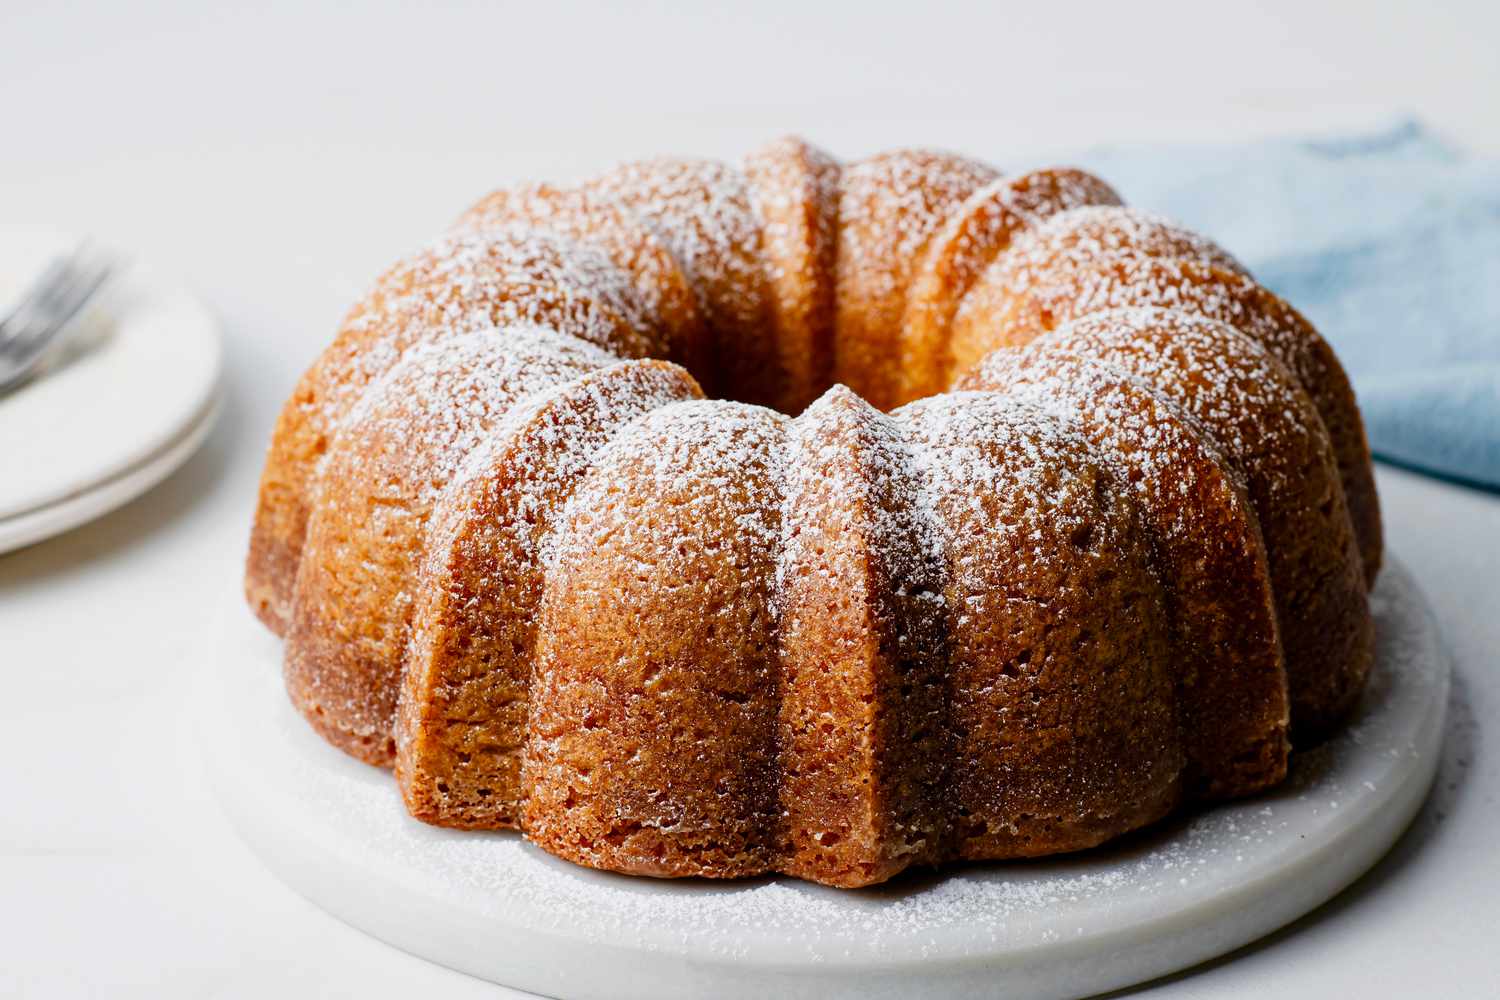 Kentucky butter bundt cake turned on a serving plate and dusted with confectioners' sugar